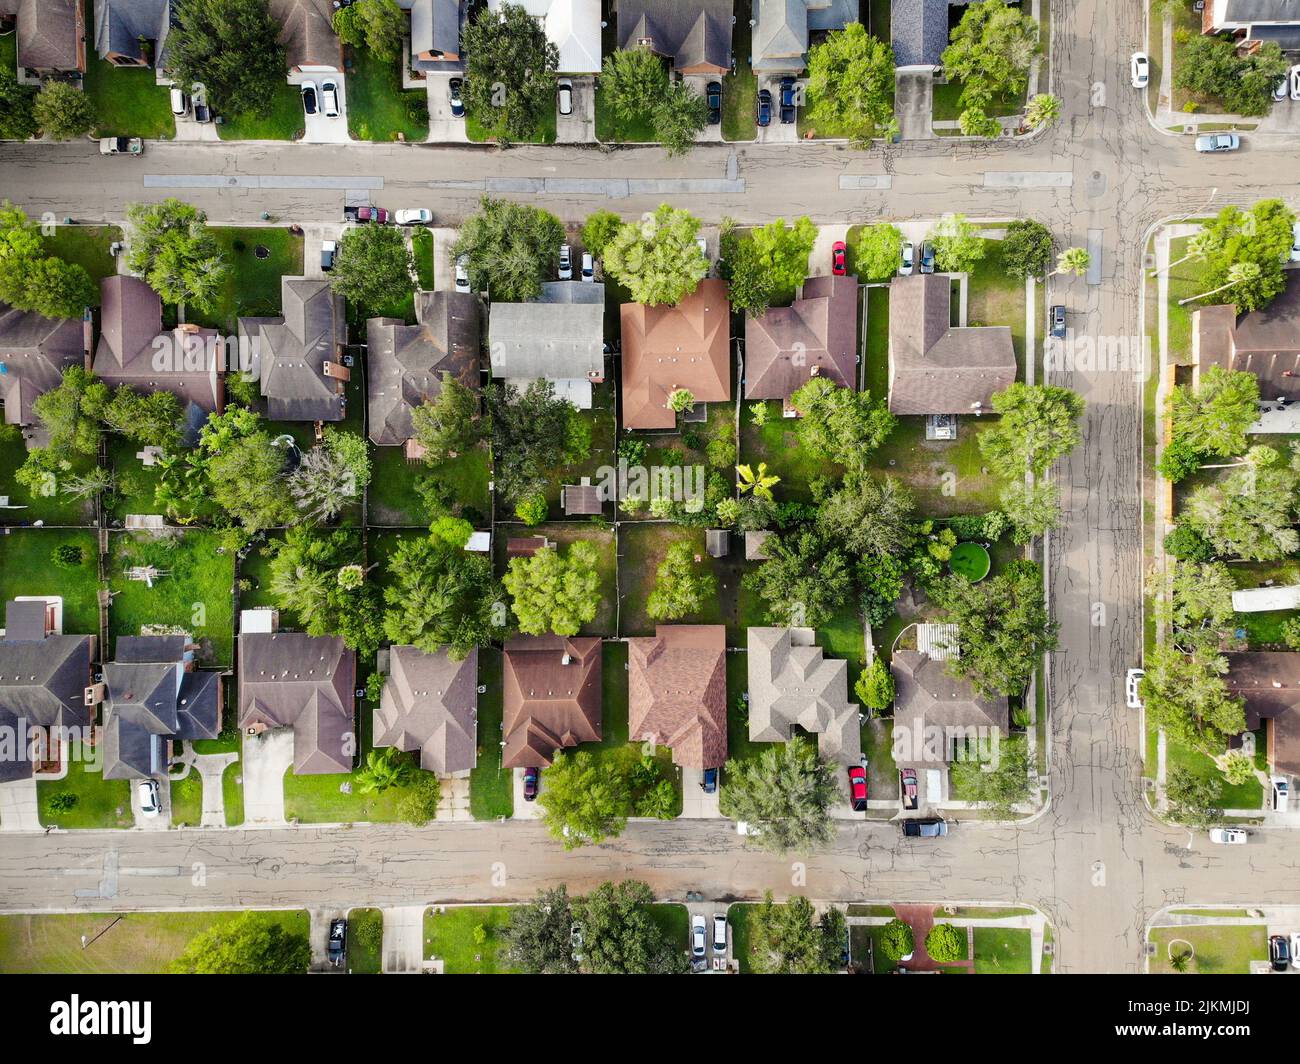 An aerial view of houses in a neighborhood Stock Photo